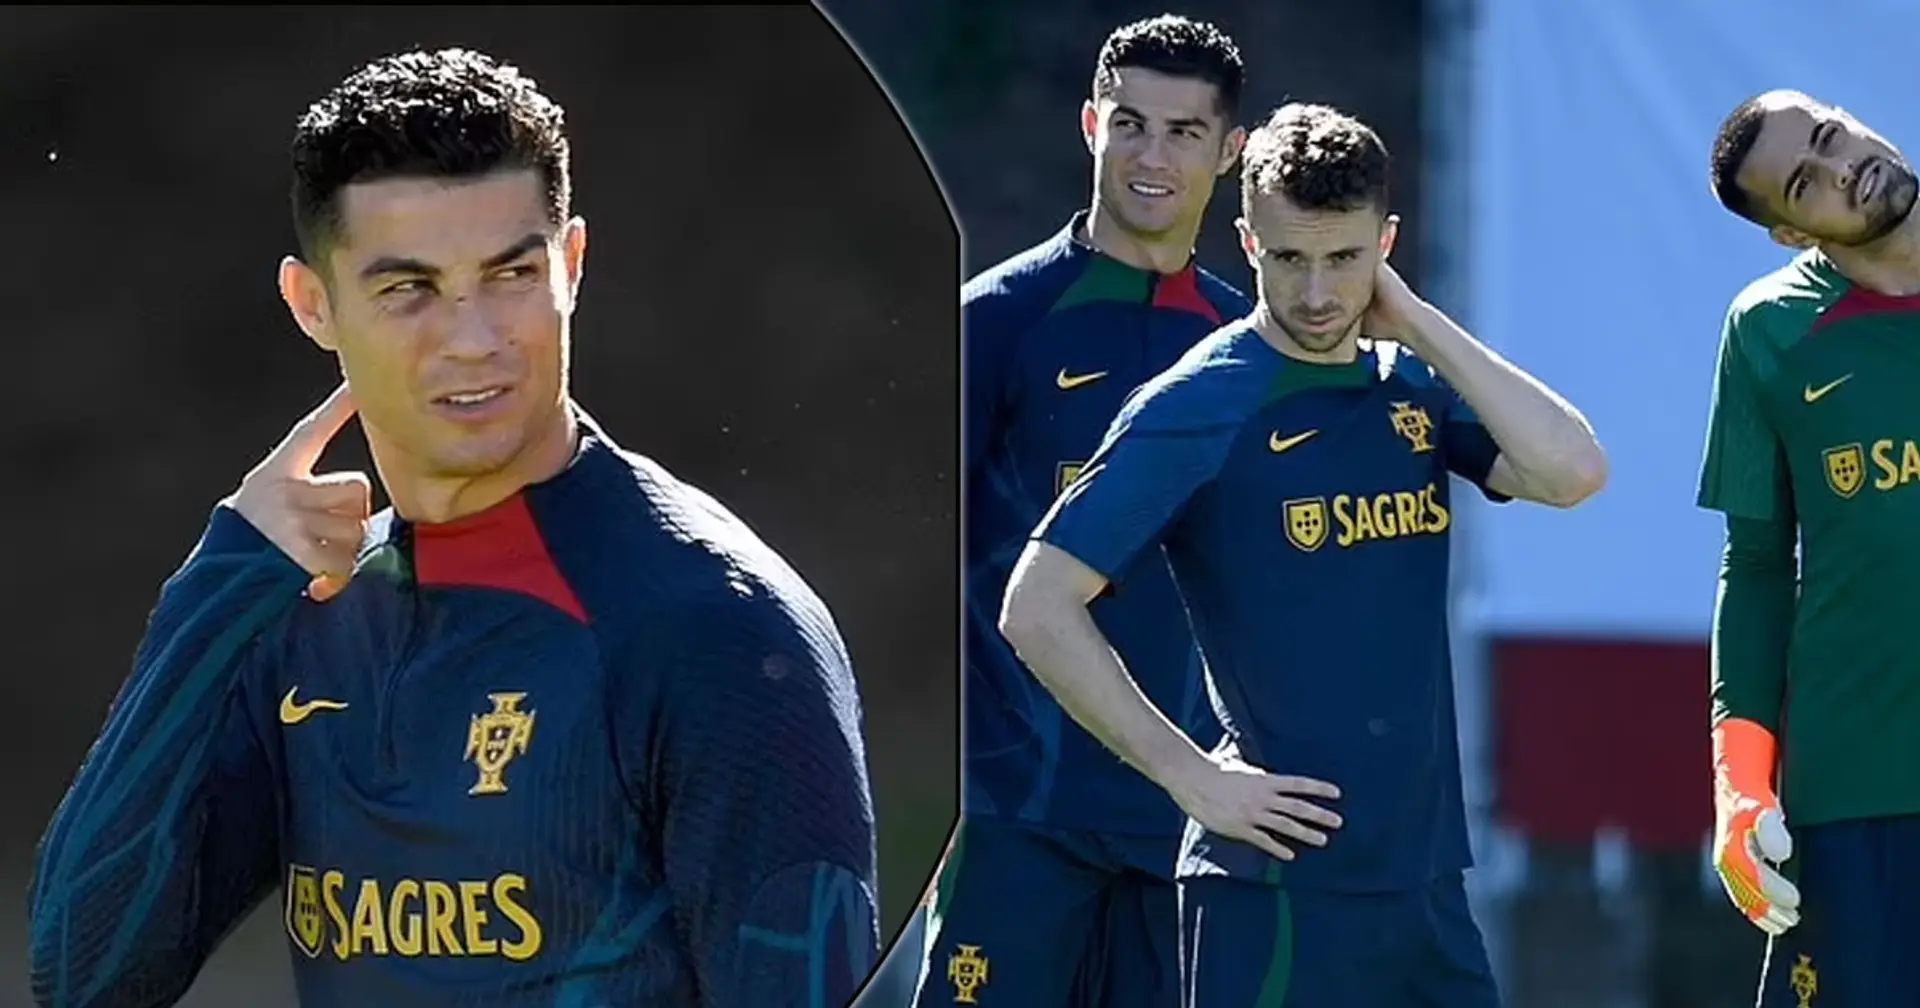 Spotted: Ronaldo shows nasty black eye after getting injured in Portugal clash